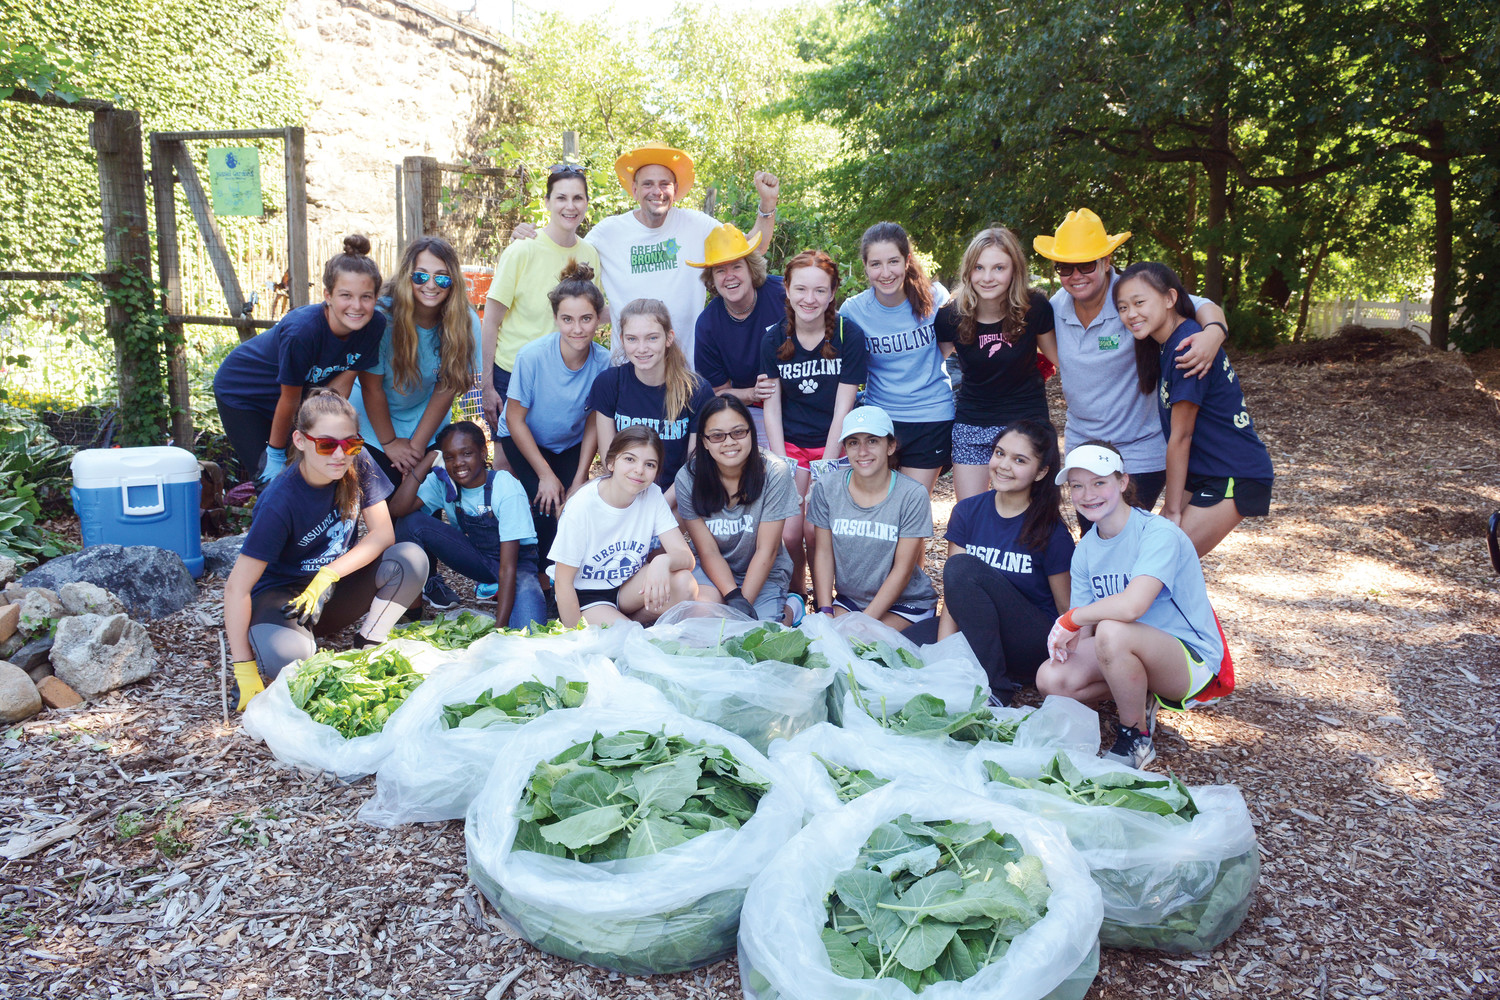 Fifteen students from The Ursuline School in New Rochelle, joined by their new principal, Rosemary Beirne, navy blue shirt and golden hat, reap what they sowed at the Food for Others Garden in the Wakefield section of the Bronx July 10. Students filled bags with collard greens, basil and jalapeno peppers.